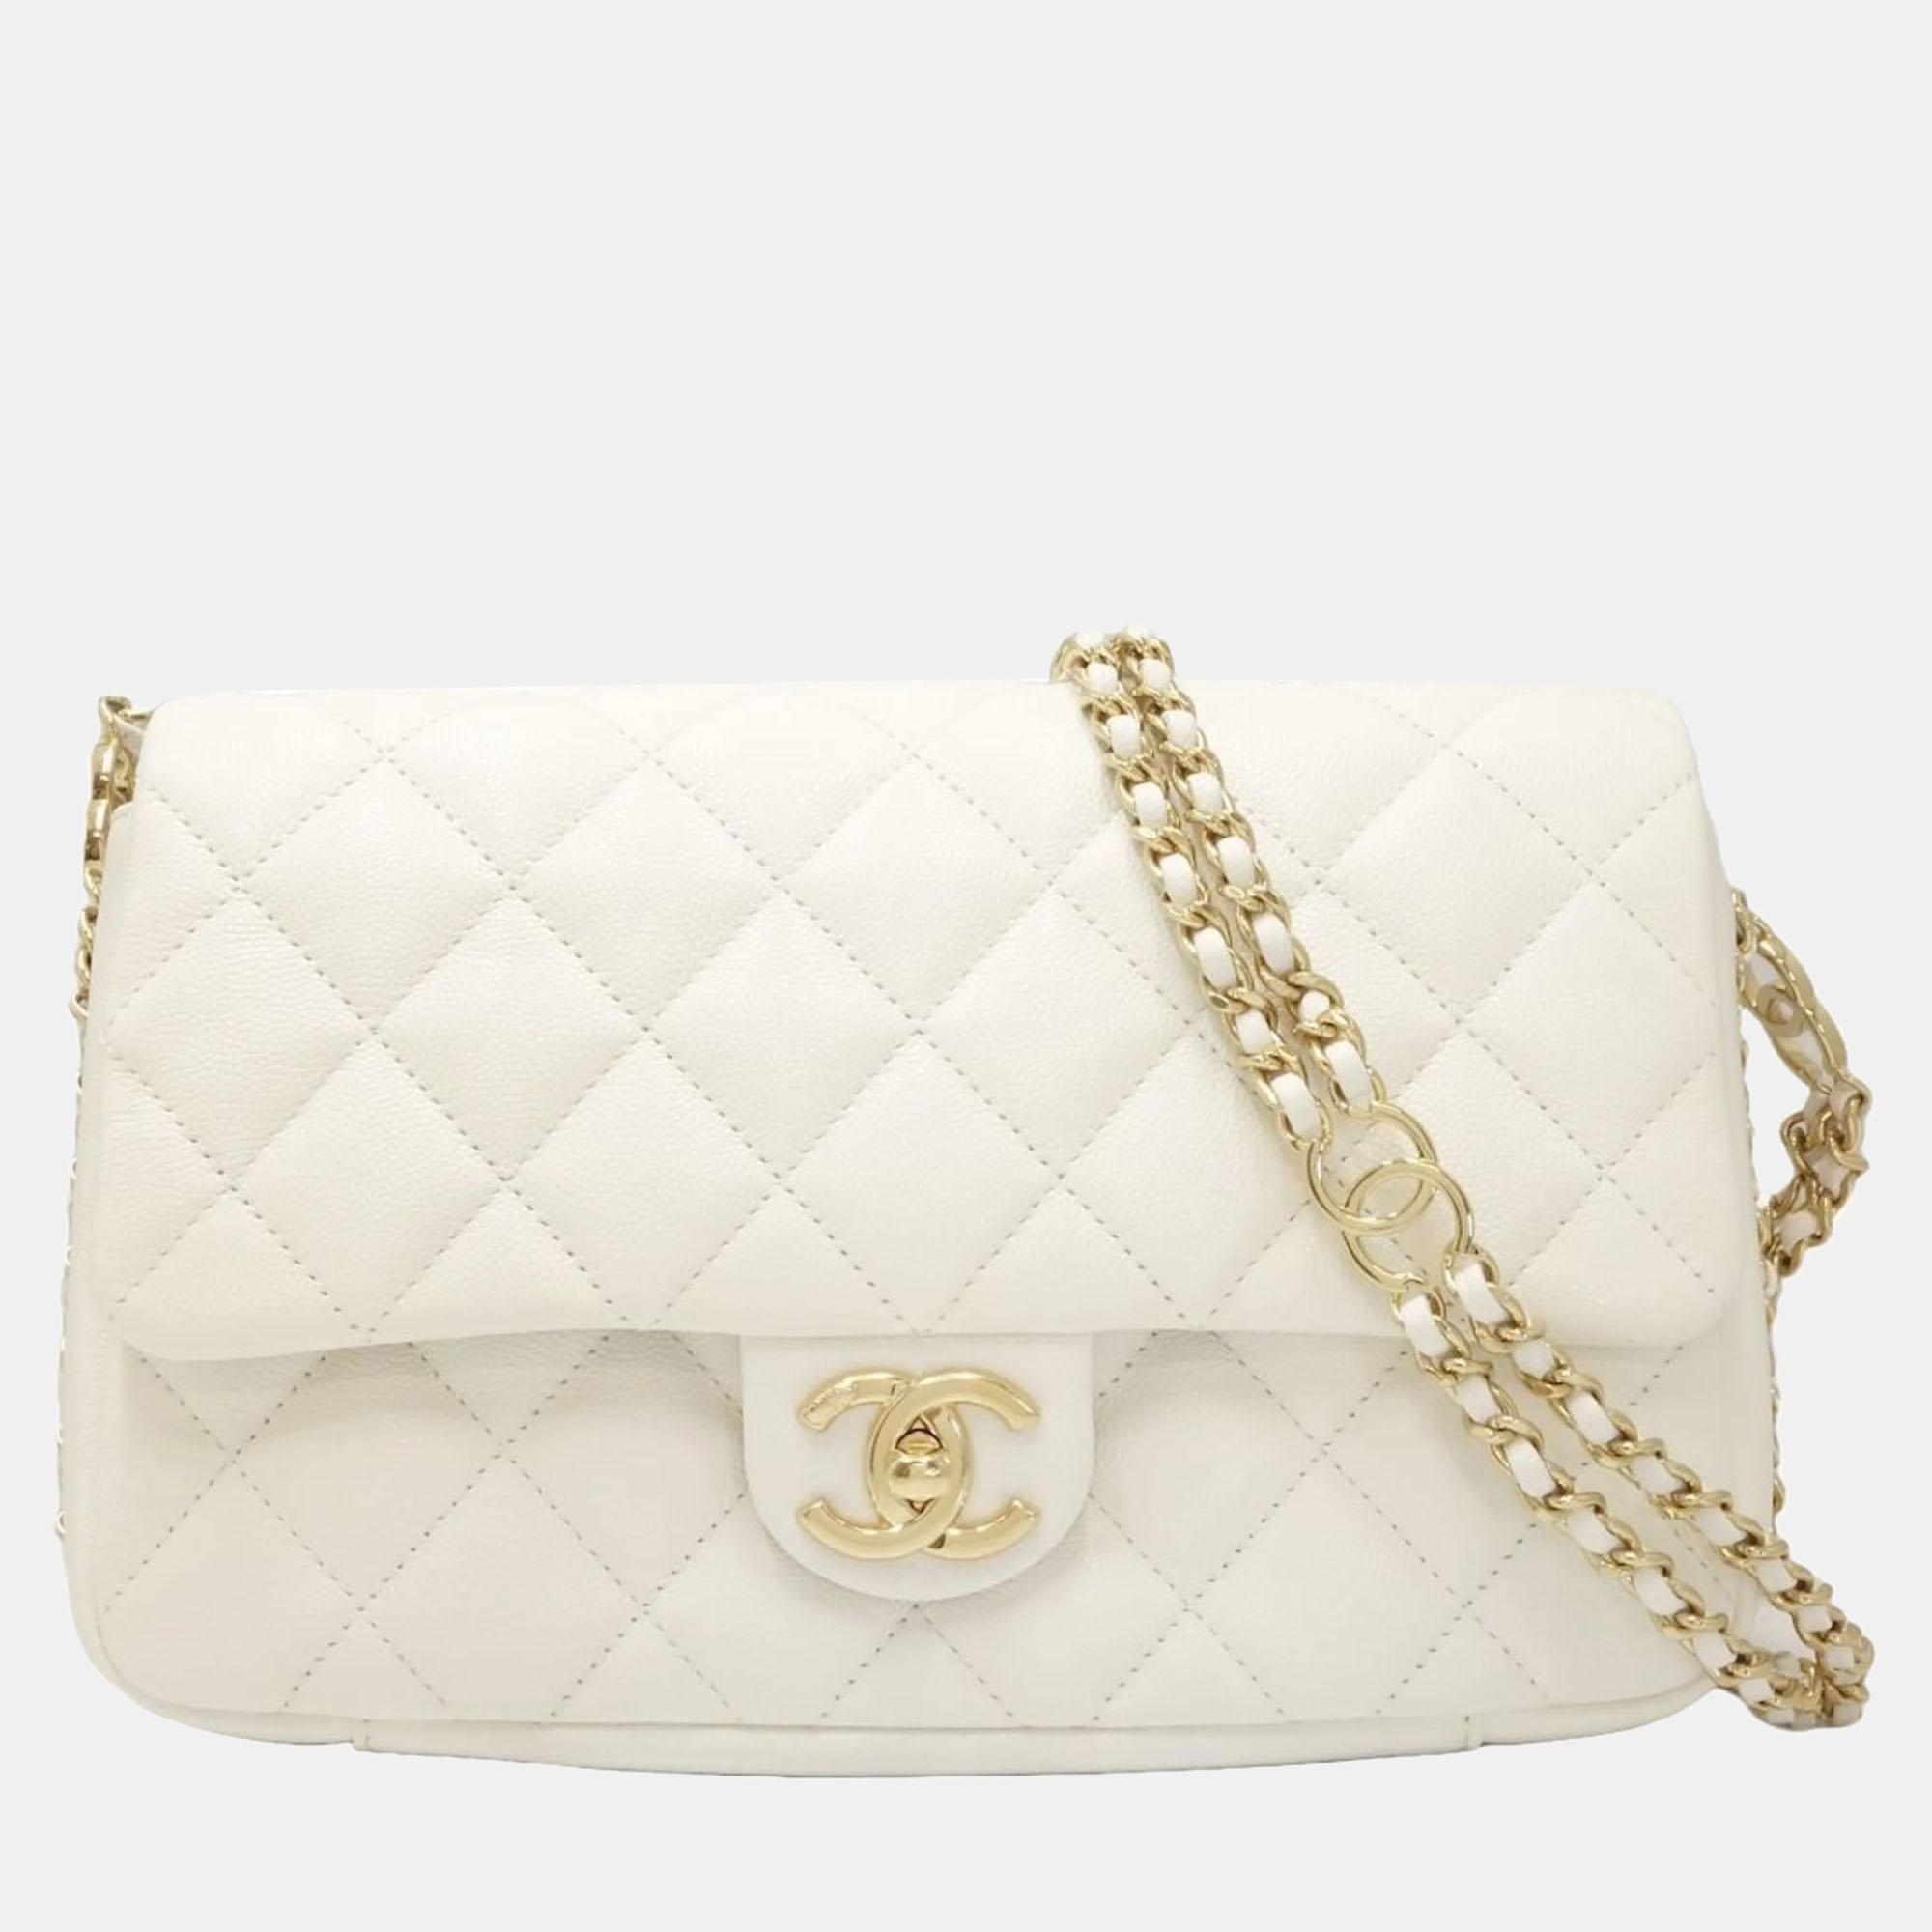 Chanel white quilted lambskin pearl crush mini flap bag